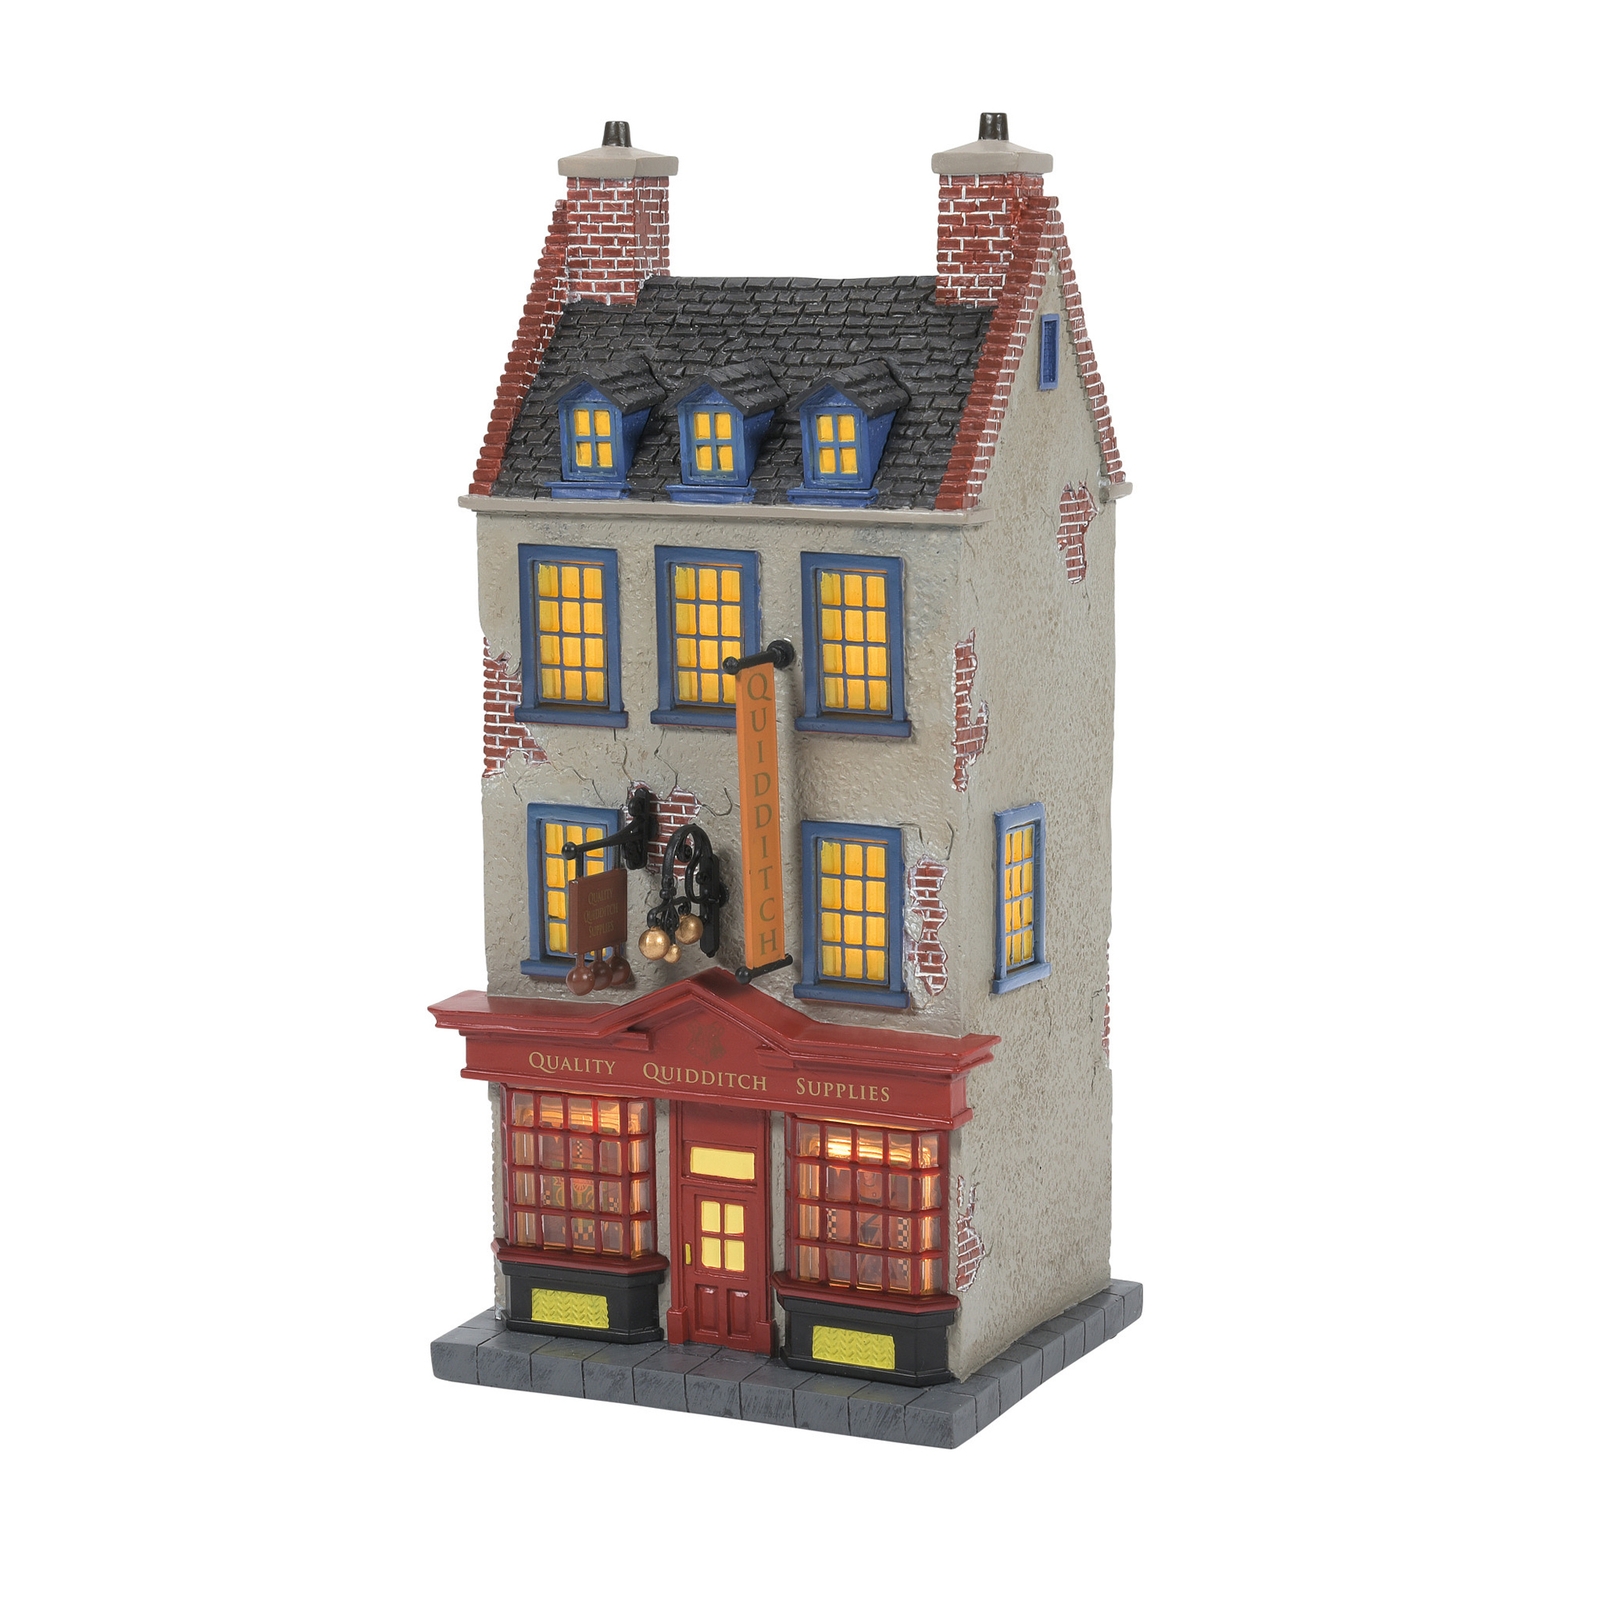 Photos - Other Toys Enesco Harry Potter Illuminated Buildings Quality Quidditch™ Supplies (22c 